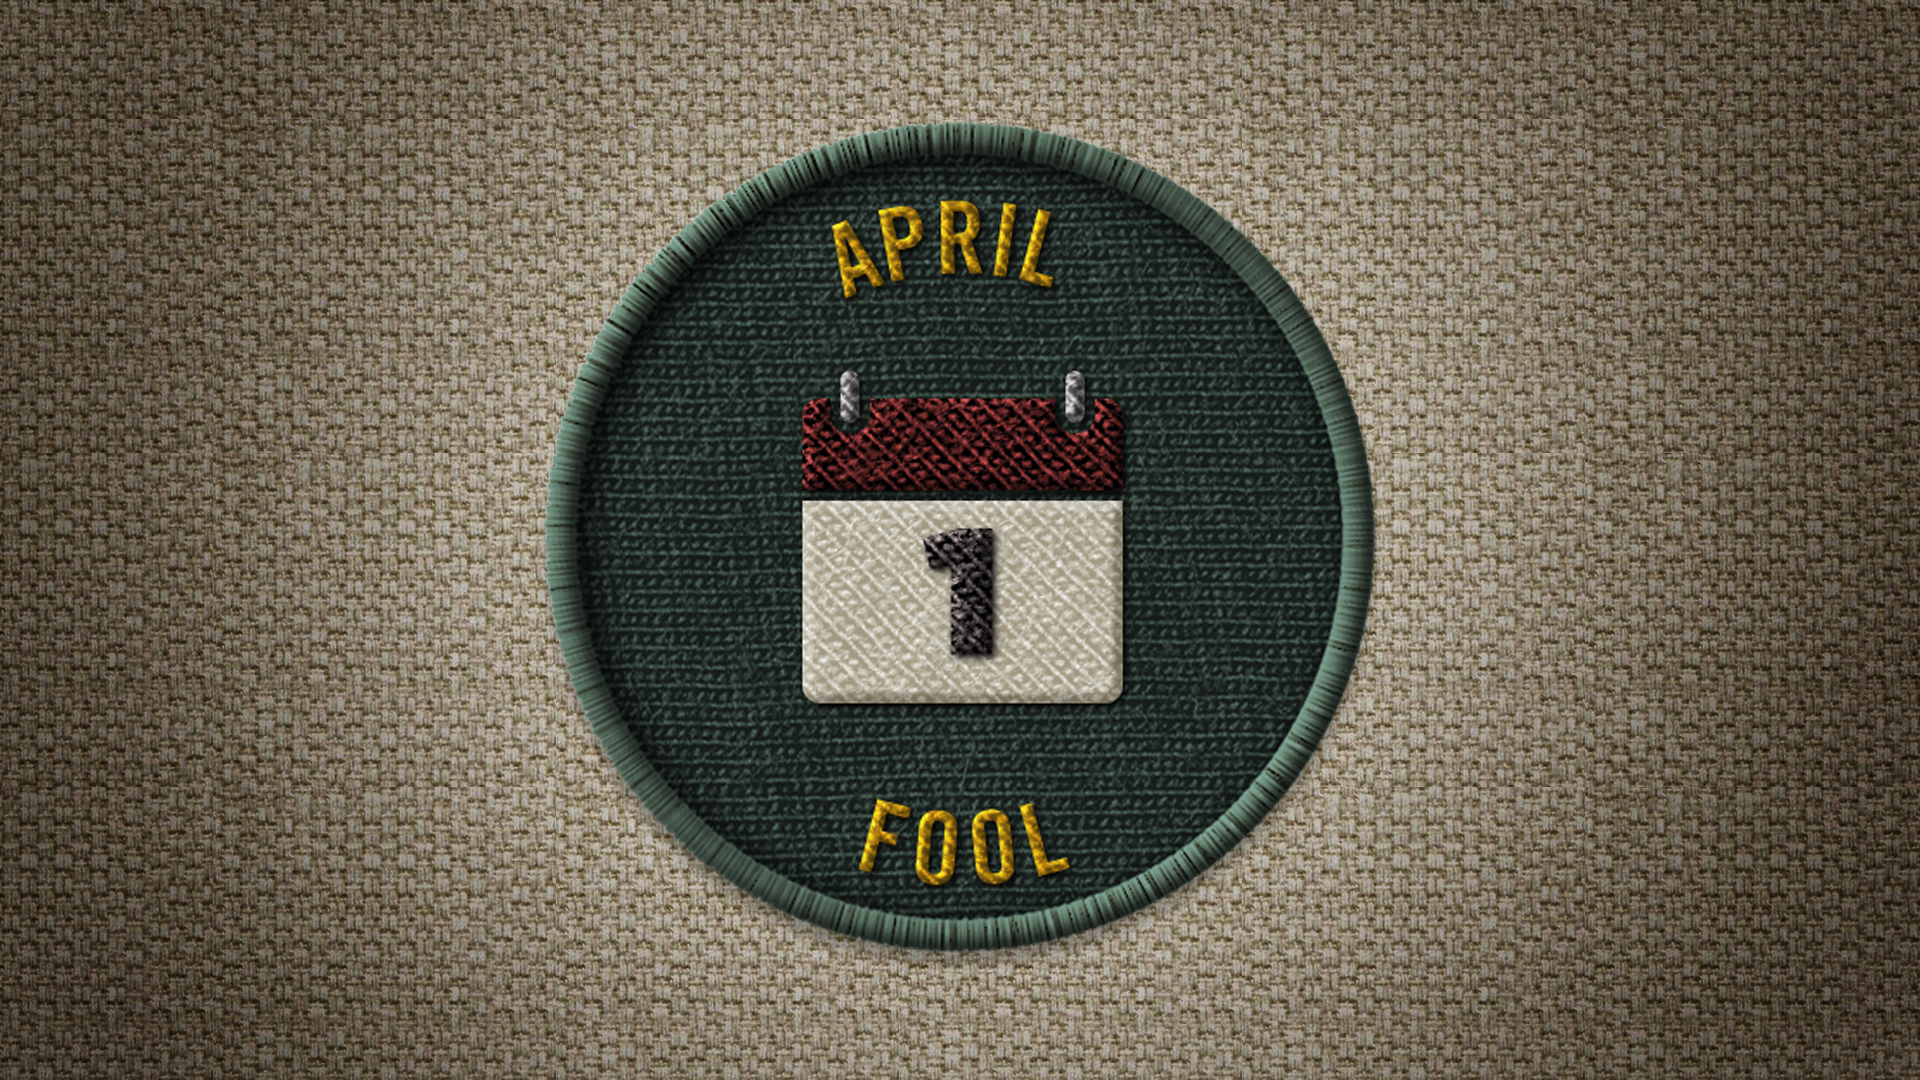 Icon for April fool